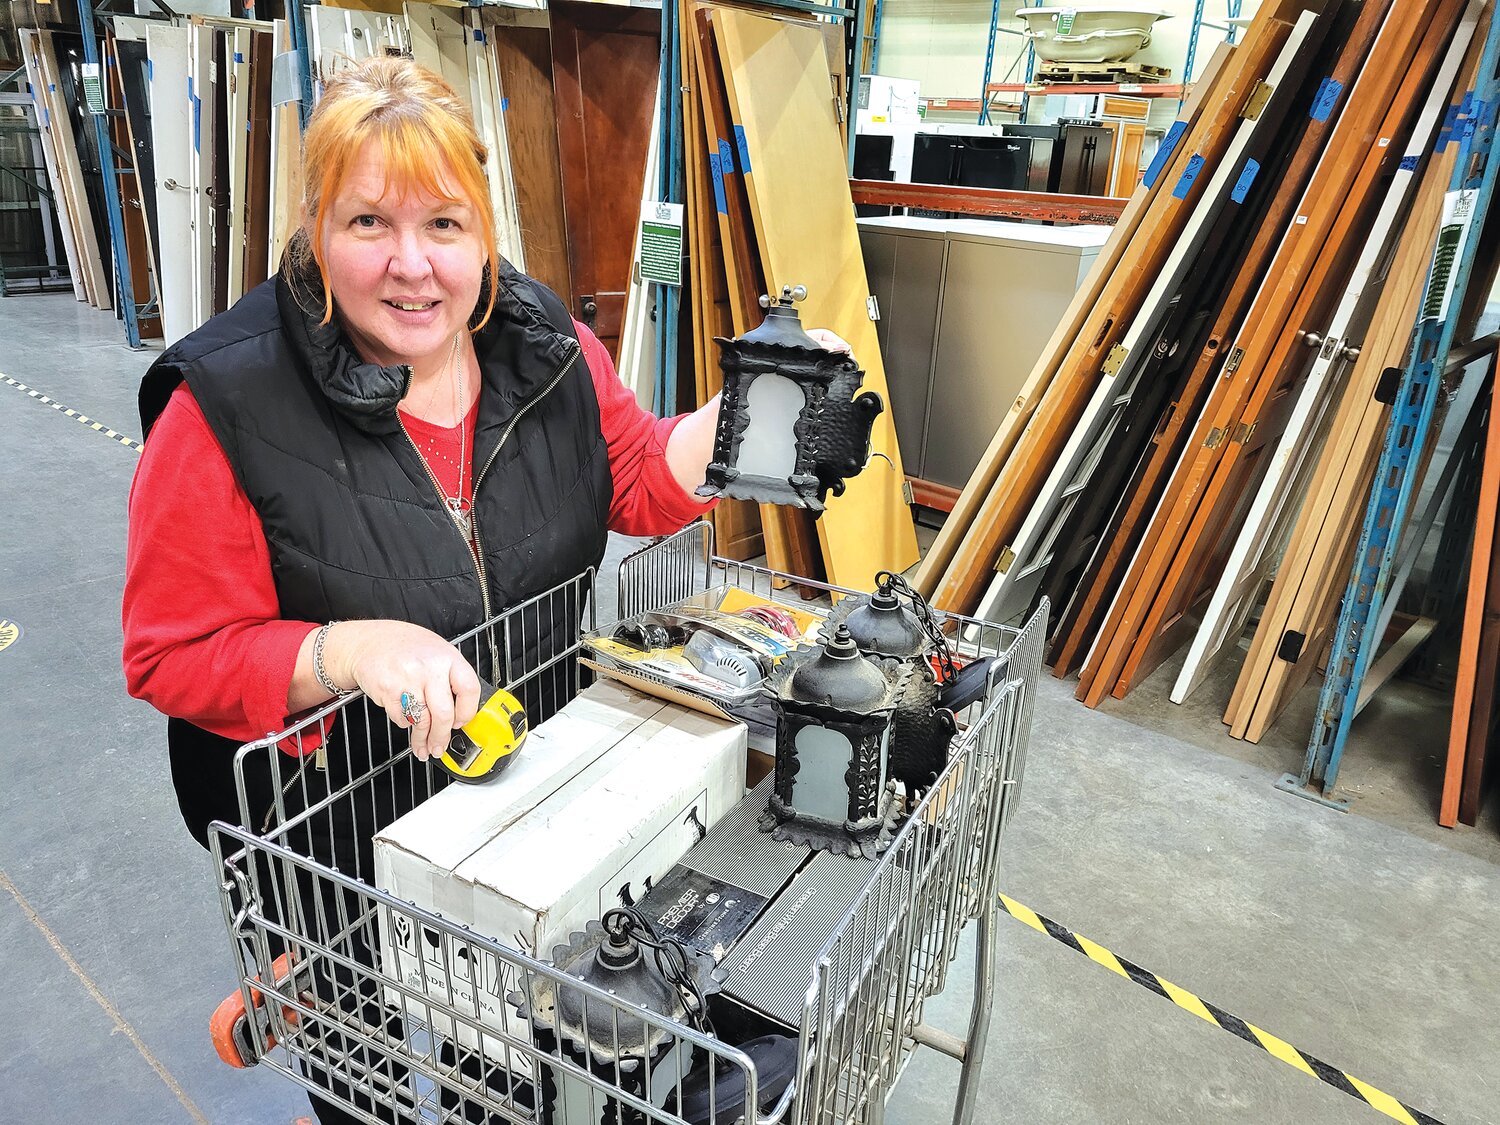 Diane Schray, a real estate agent with Real Estate Masters, shopped on April 28 at the ReUse Warehouse, scoring vintage fixtures for a client who recently bought a tudor-style house in Como neighborhood. The clerk remarked that they had just come in that day.